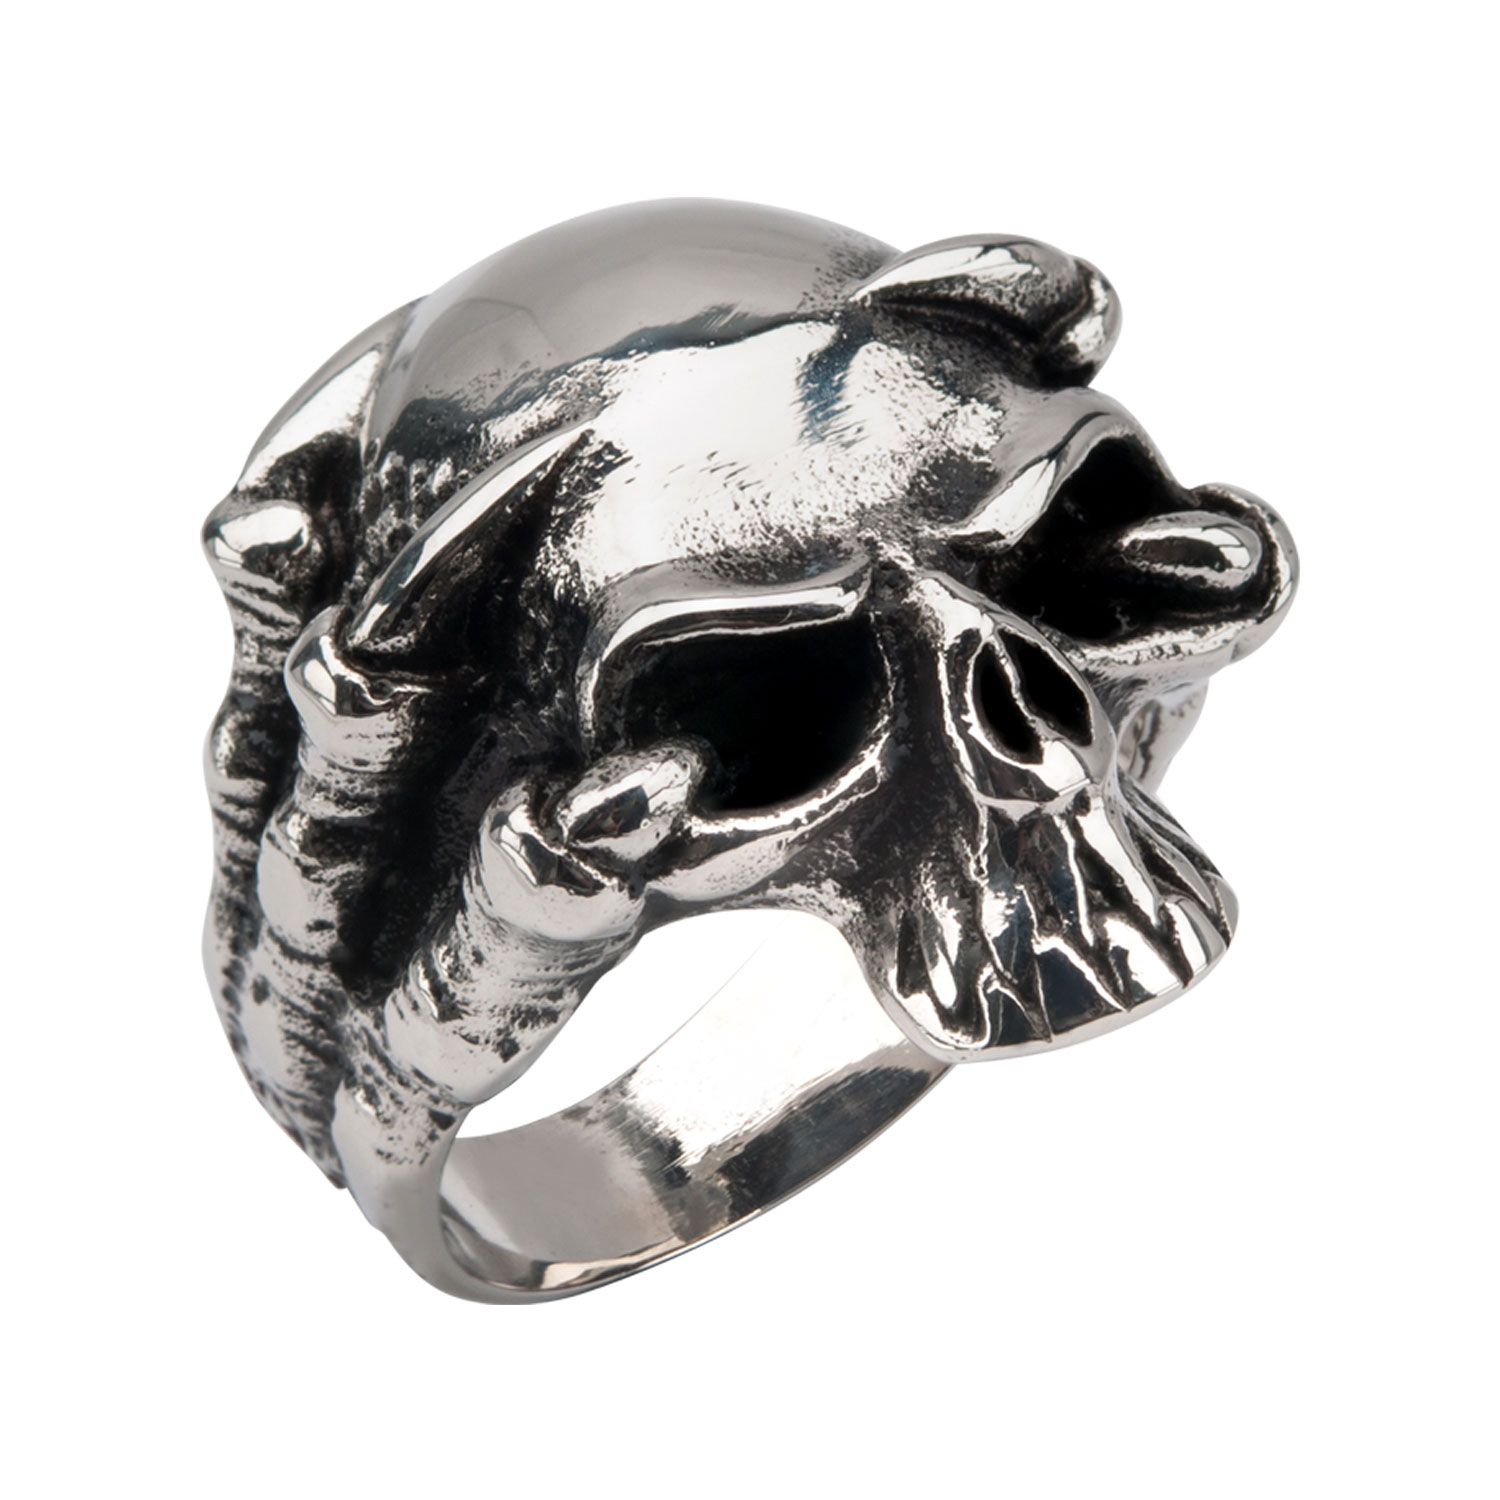 Black Oxidized Skull Ring with Claws Thurber's Fine Jewelry Wadsworth, OH